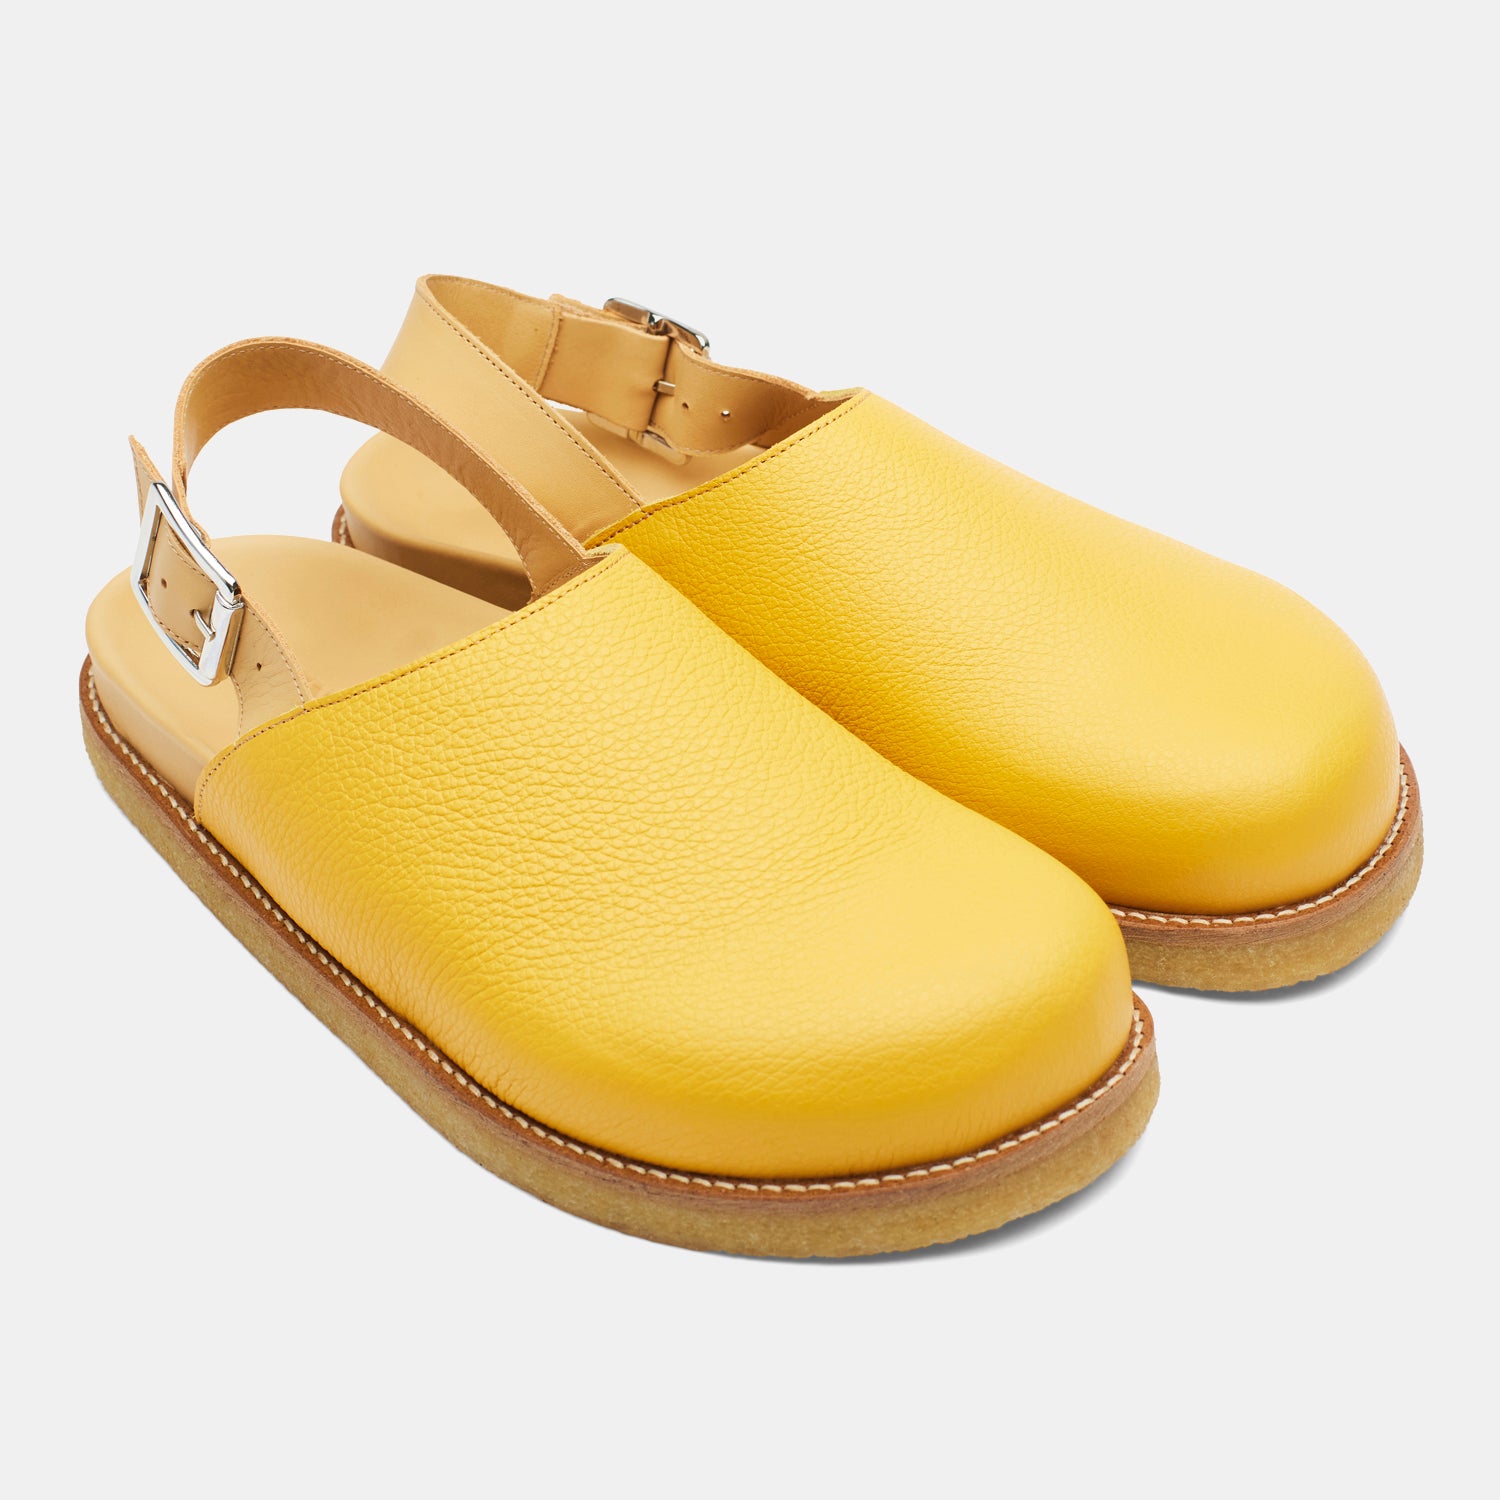 mens yellow strapped mule